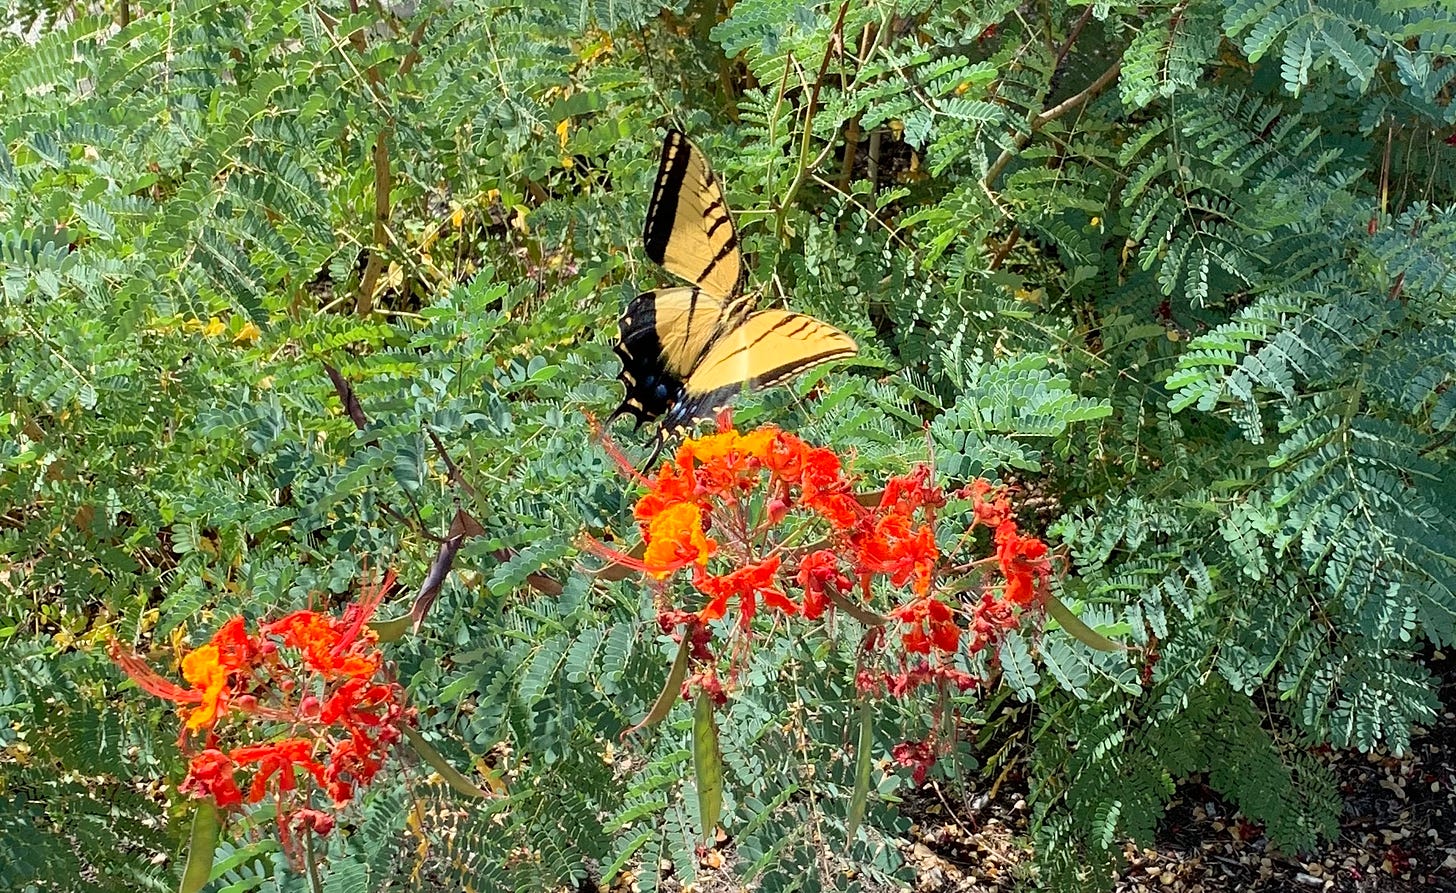 yellow swallowtail butterfly above orange and red flowers surrounded by greenery